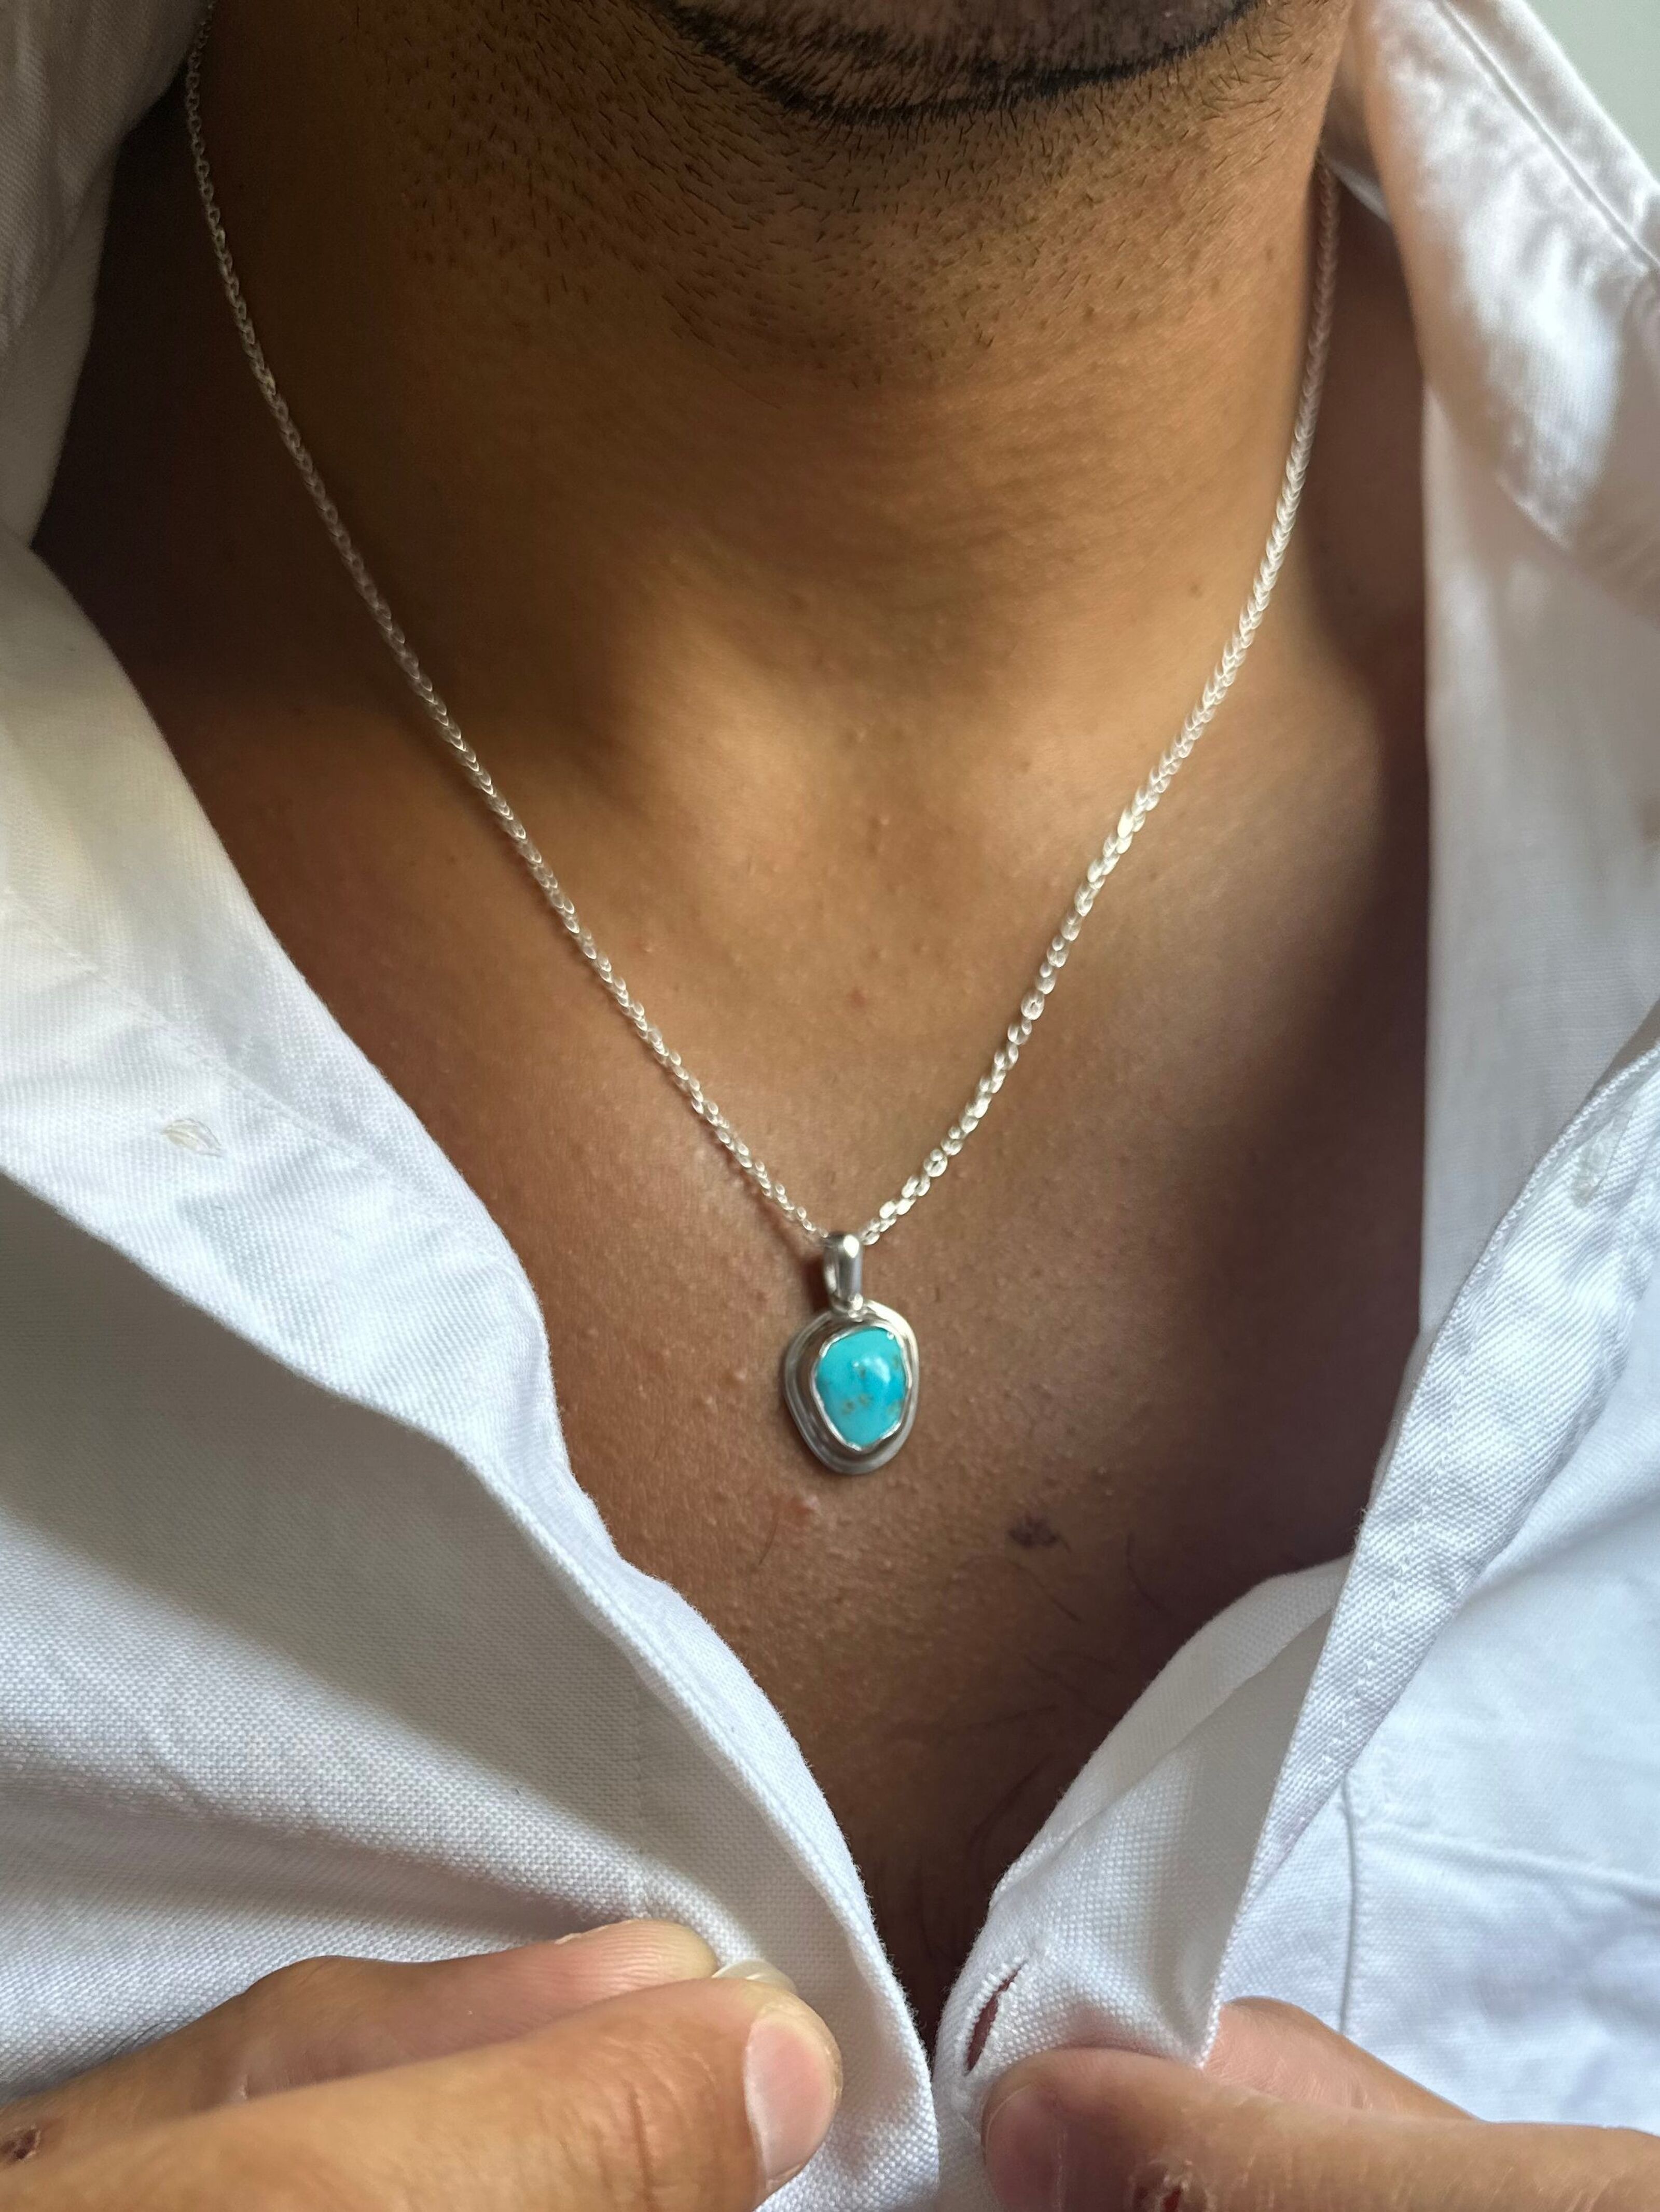 Men, Necklace, Real Necklace SIlver Men, wholesale Pendant, Turquoise from Men\'s Sterling Turquoise Stone Silver Chain Pendant Made Buy